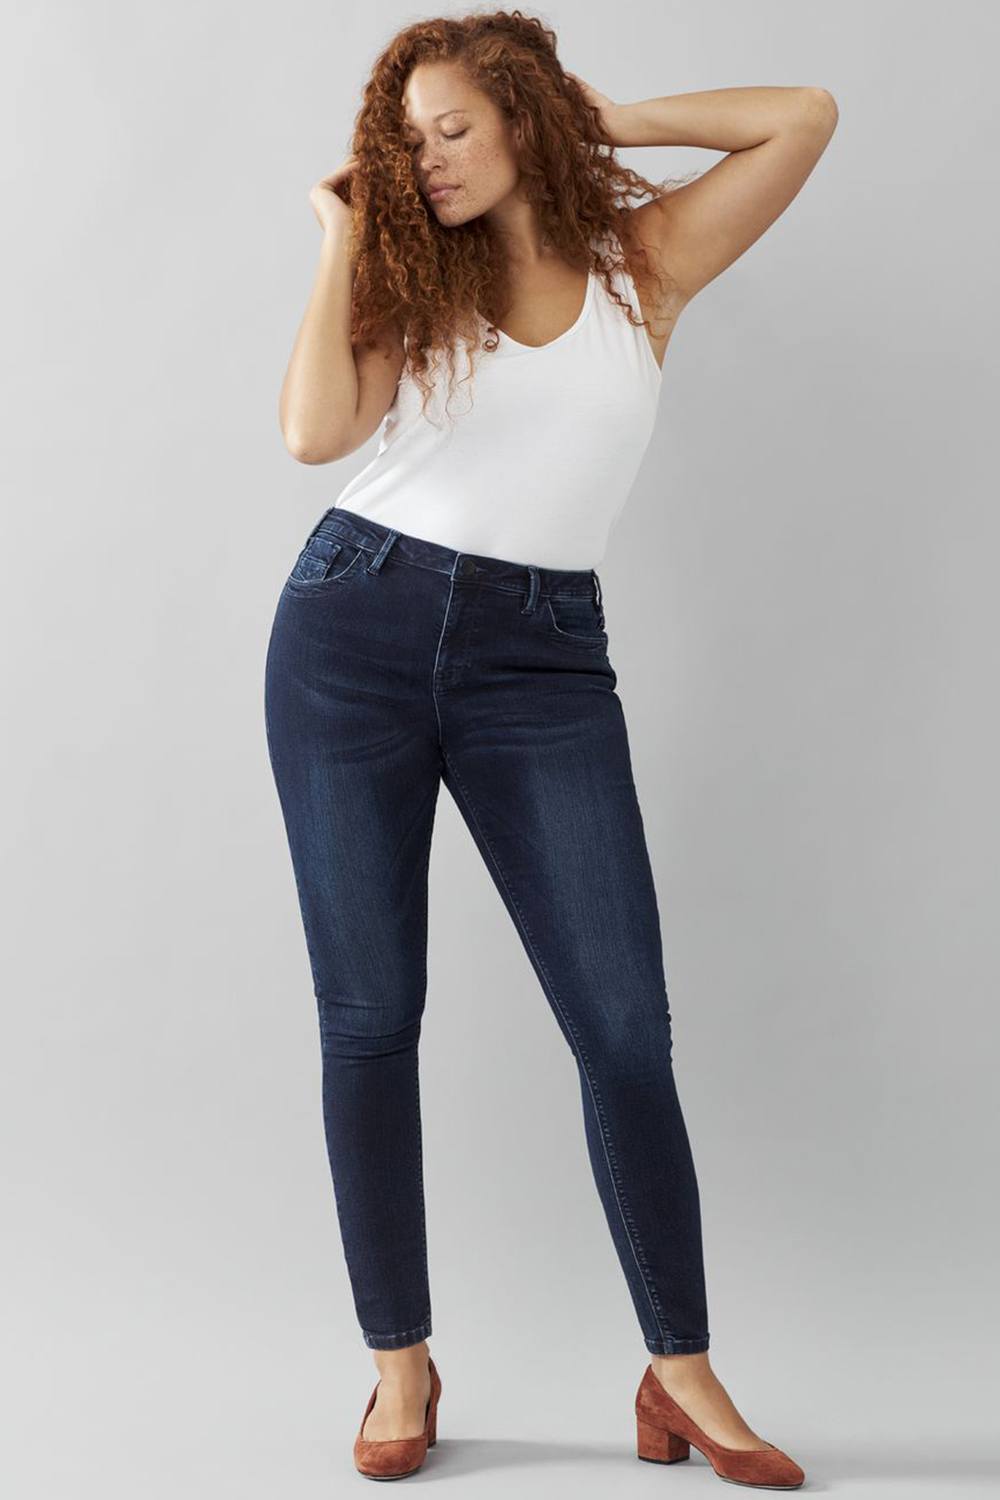 Grote maten damesmode | MATELOOS | grote Designers :: Clothing :: Jeans Amy